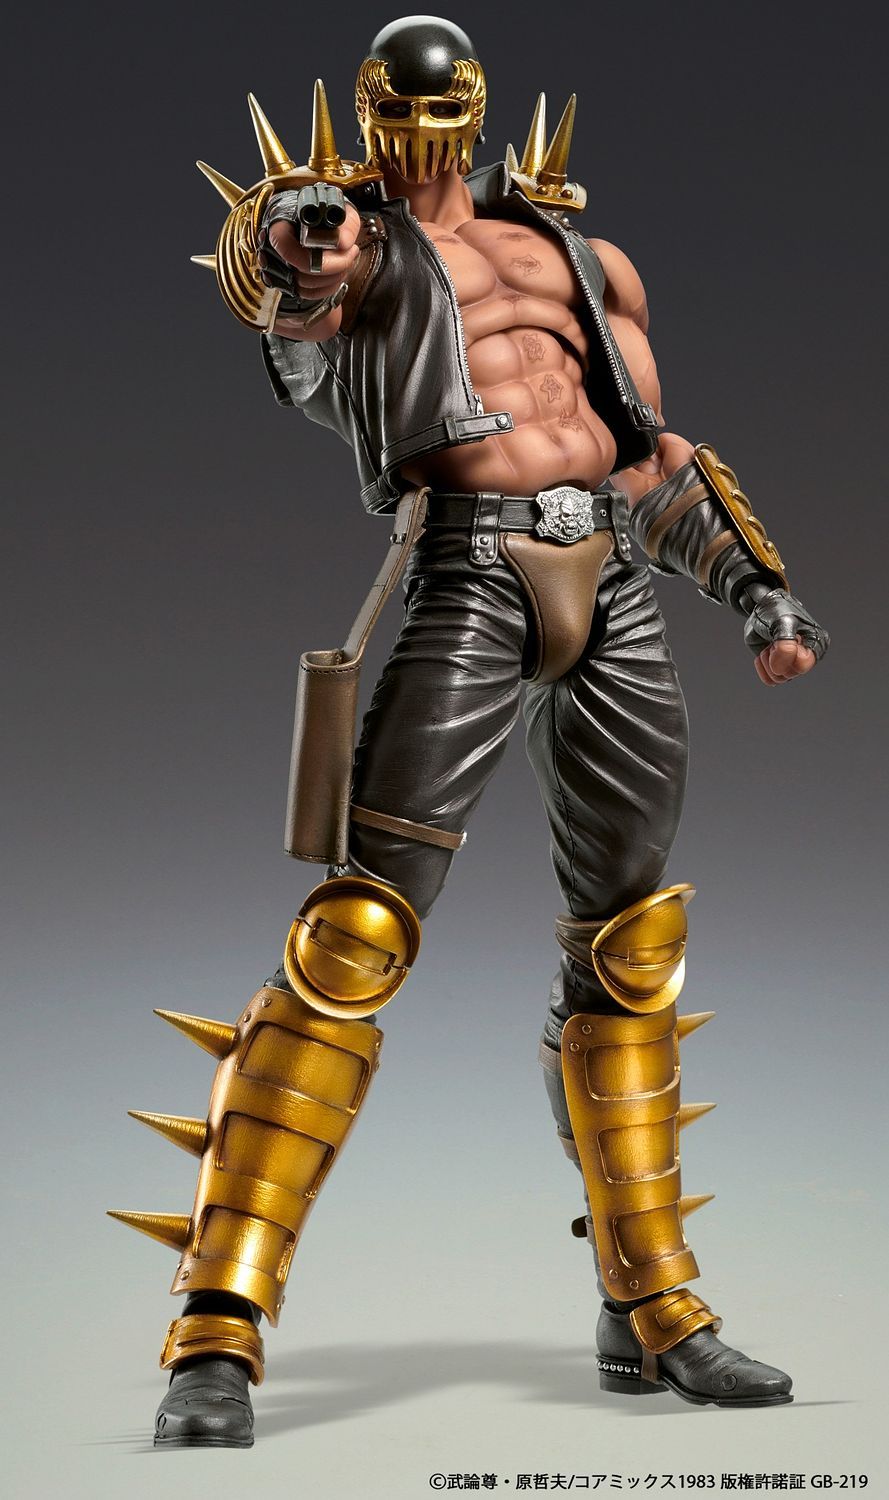 Medicos - Super Action Statue - Fist of the North Star - Jagi - Marvelous Toys